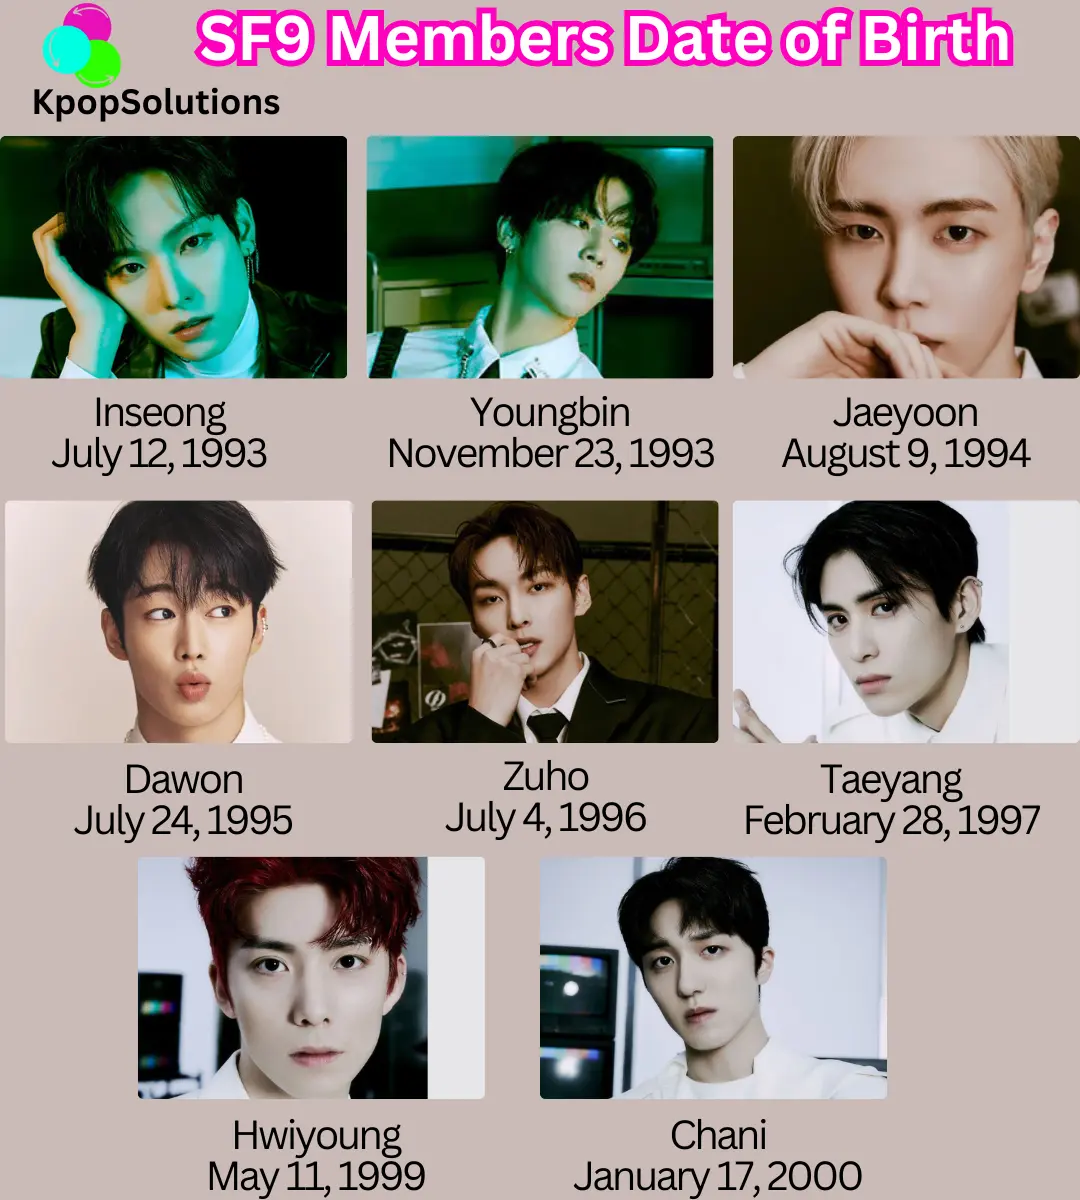 SF9 members date of birth and current ages: Inseong, Youngbin, Jaeyoon, Dawon, Zuho, Taeyang, Hwiyoung, and Chani.